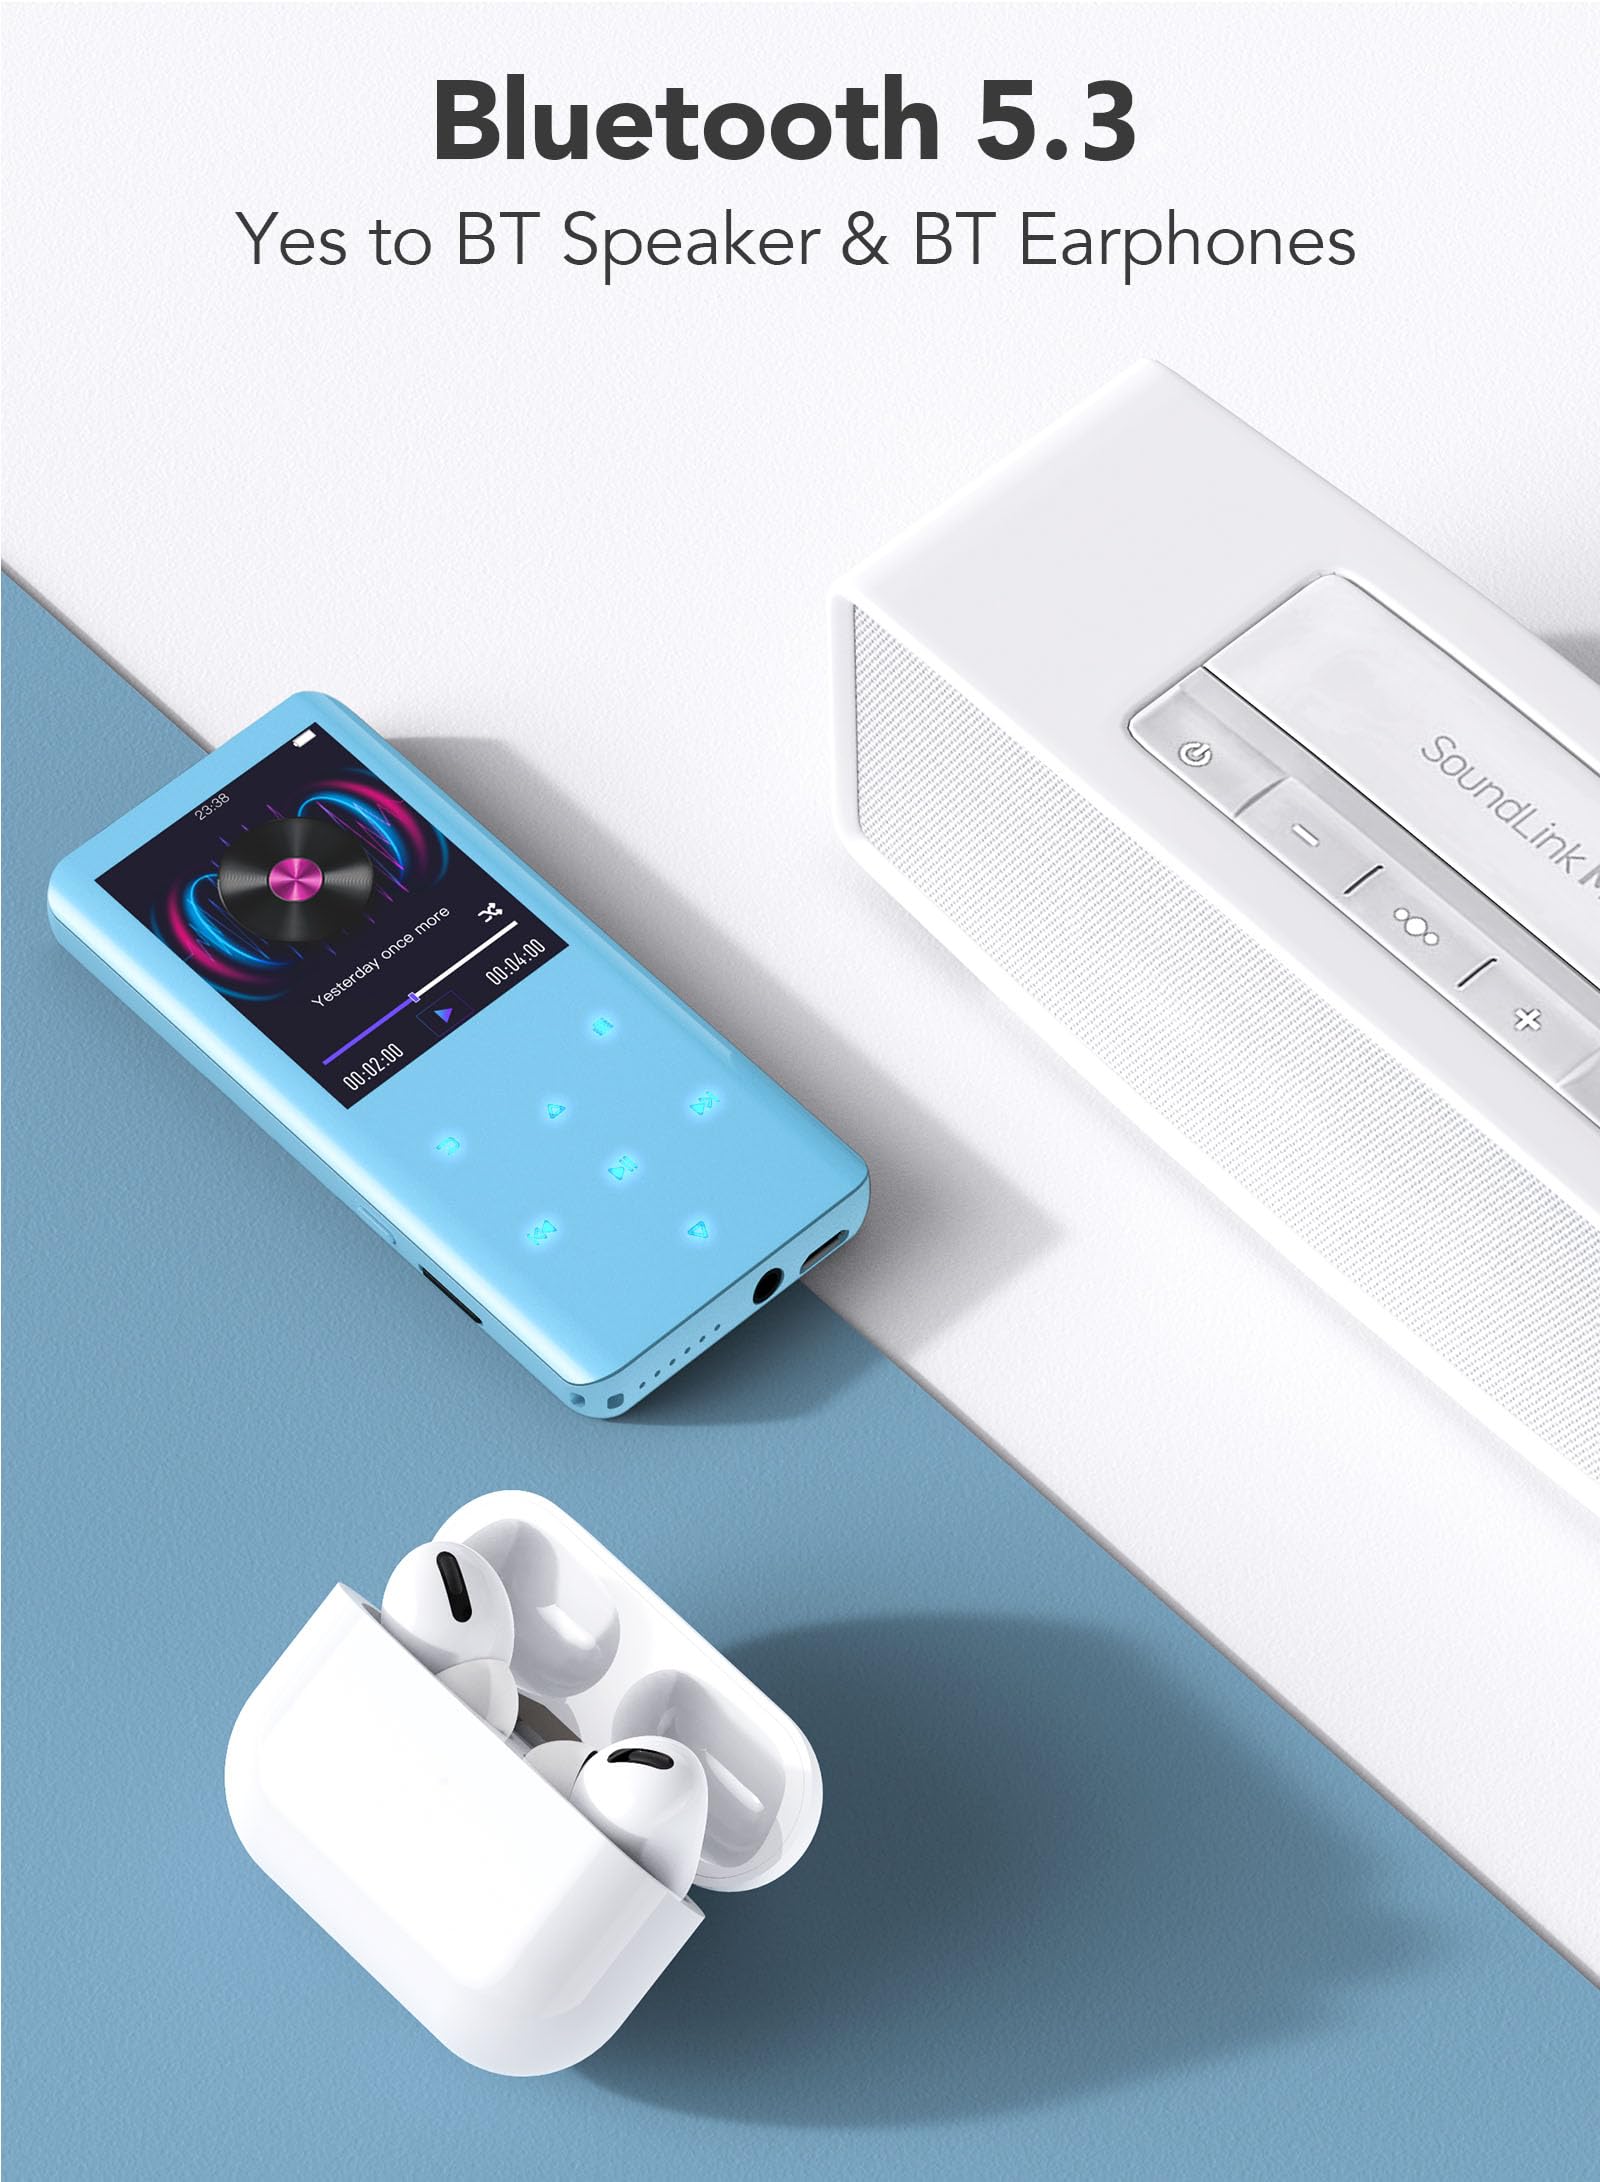 MP3 Player with Bluetooth 5.3, AGPTEK A19X 2.4" Curved Screen Portable Music Player with Speaker Lossless Sound with FM Radio, Voice Recorder, Built in 32GB, Supports up to 128GB, Blue